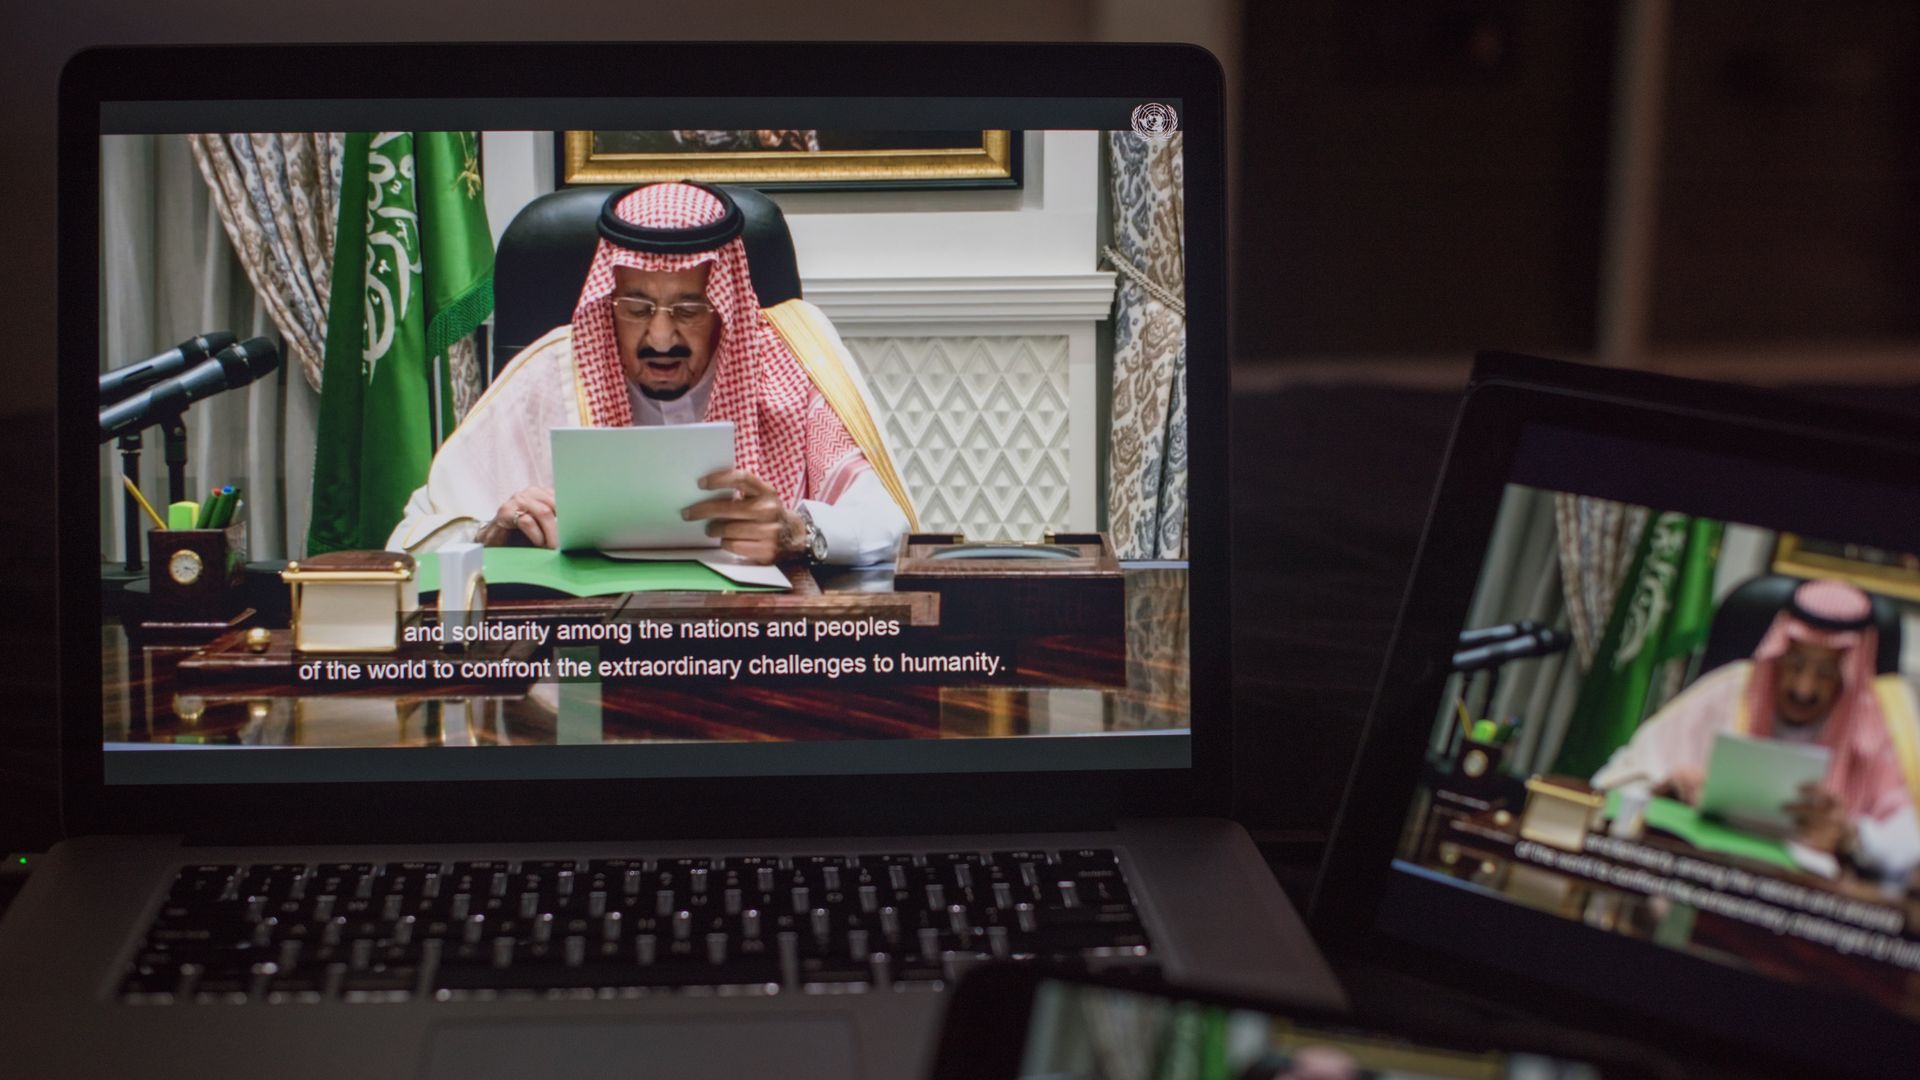 Saudi Arabia's King Salman is seen delivering a speech to the United Nations via Zoom.